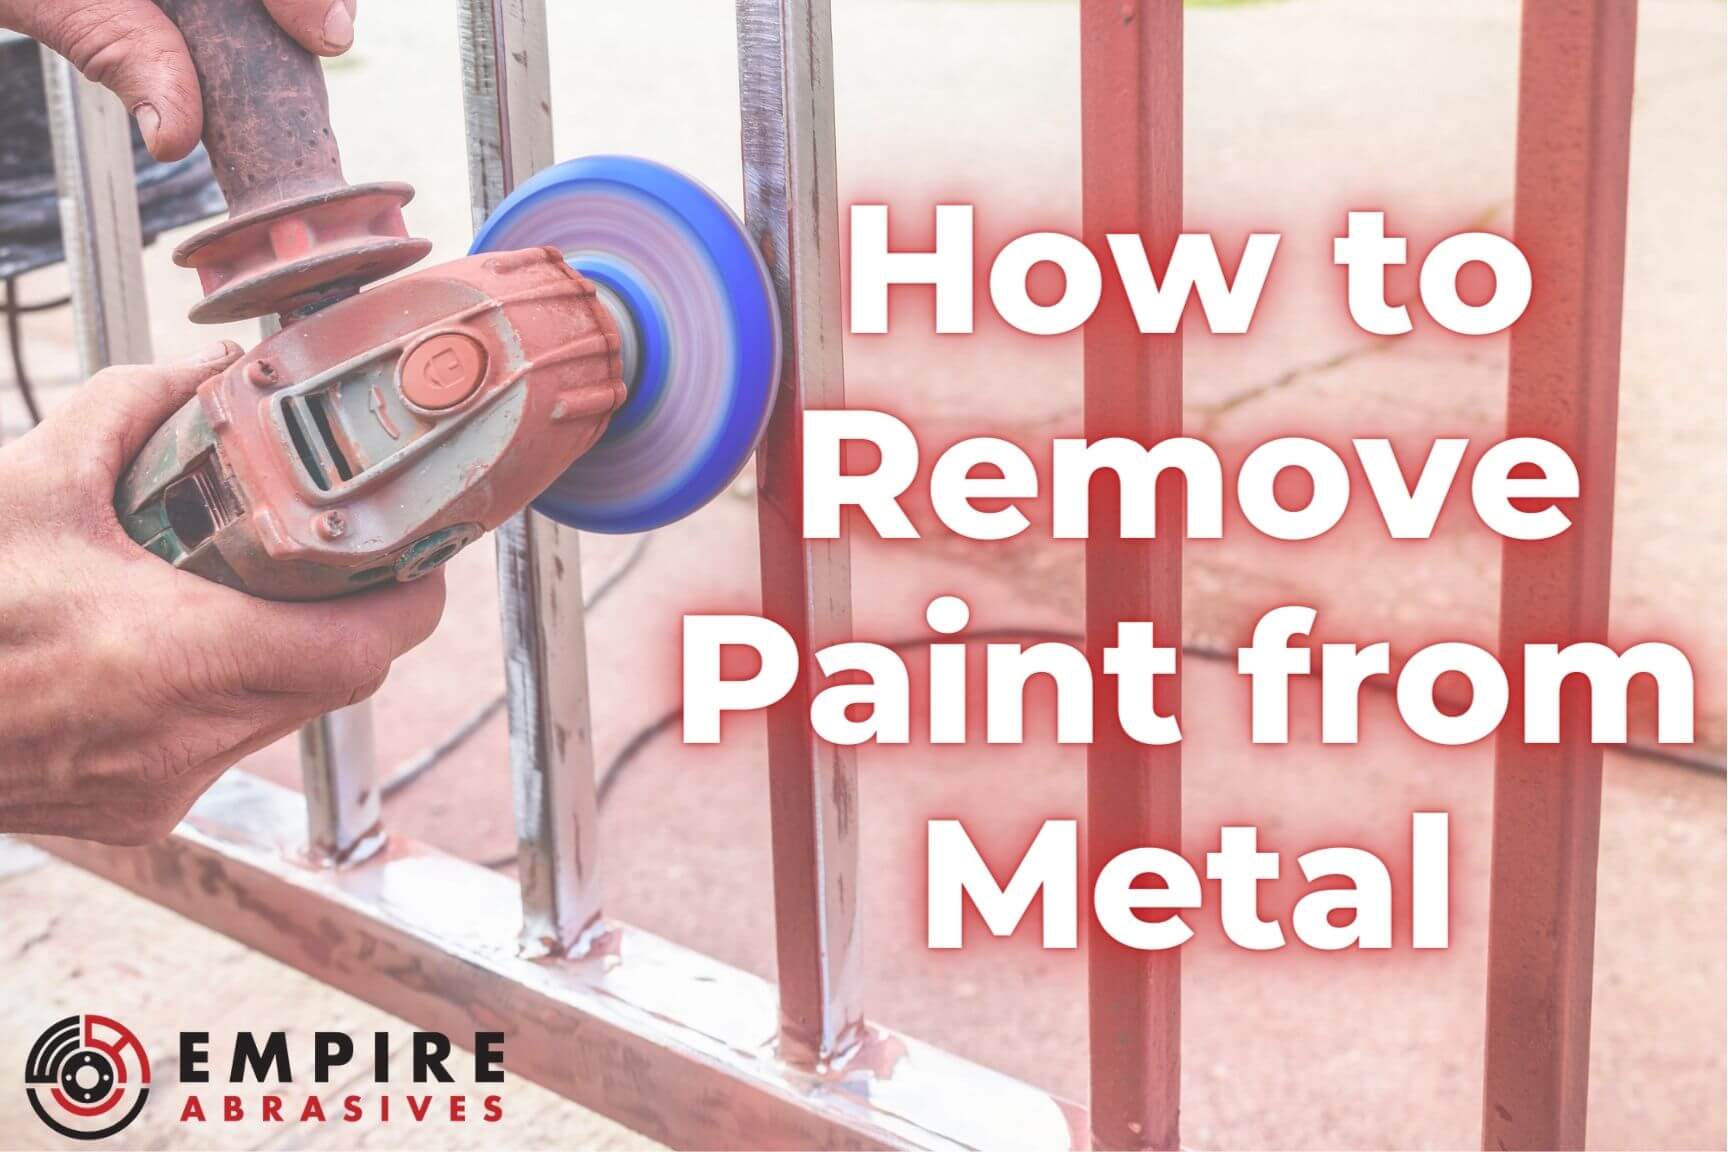 How to Remove Paint from Metal - Empire Abrasives